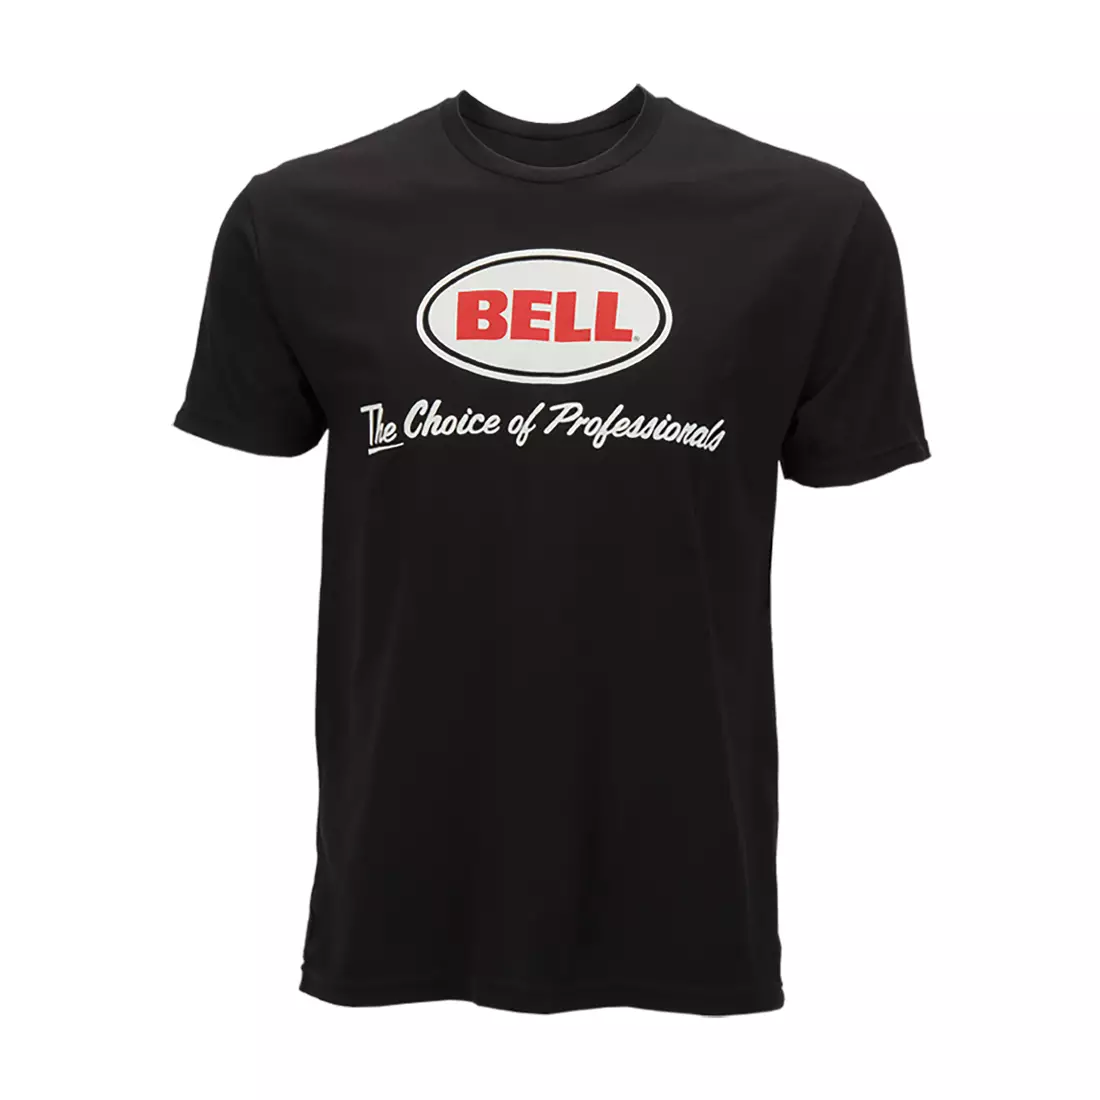 BELL men's t-shirt with short sleeves BASIC CHOICE OF PROS black BEL-7070715